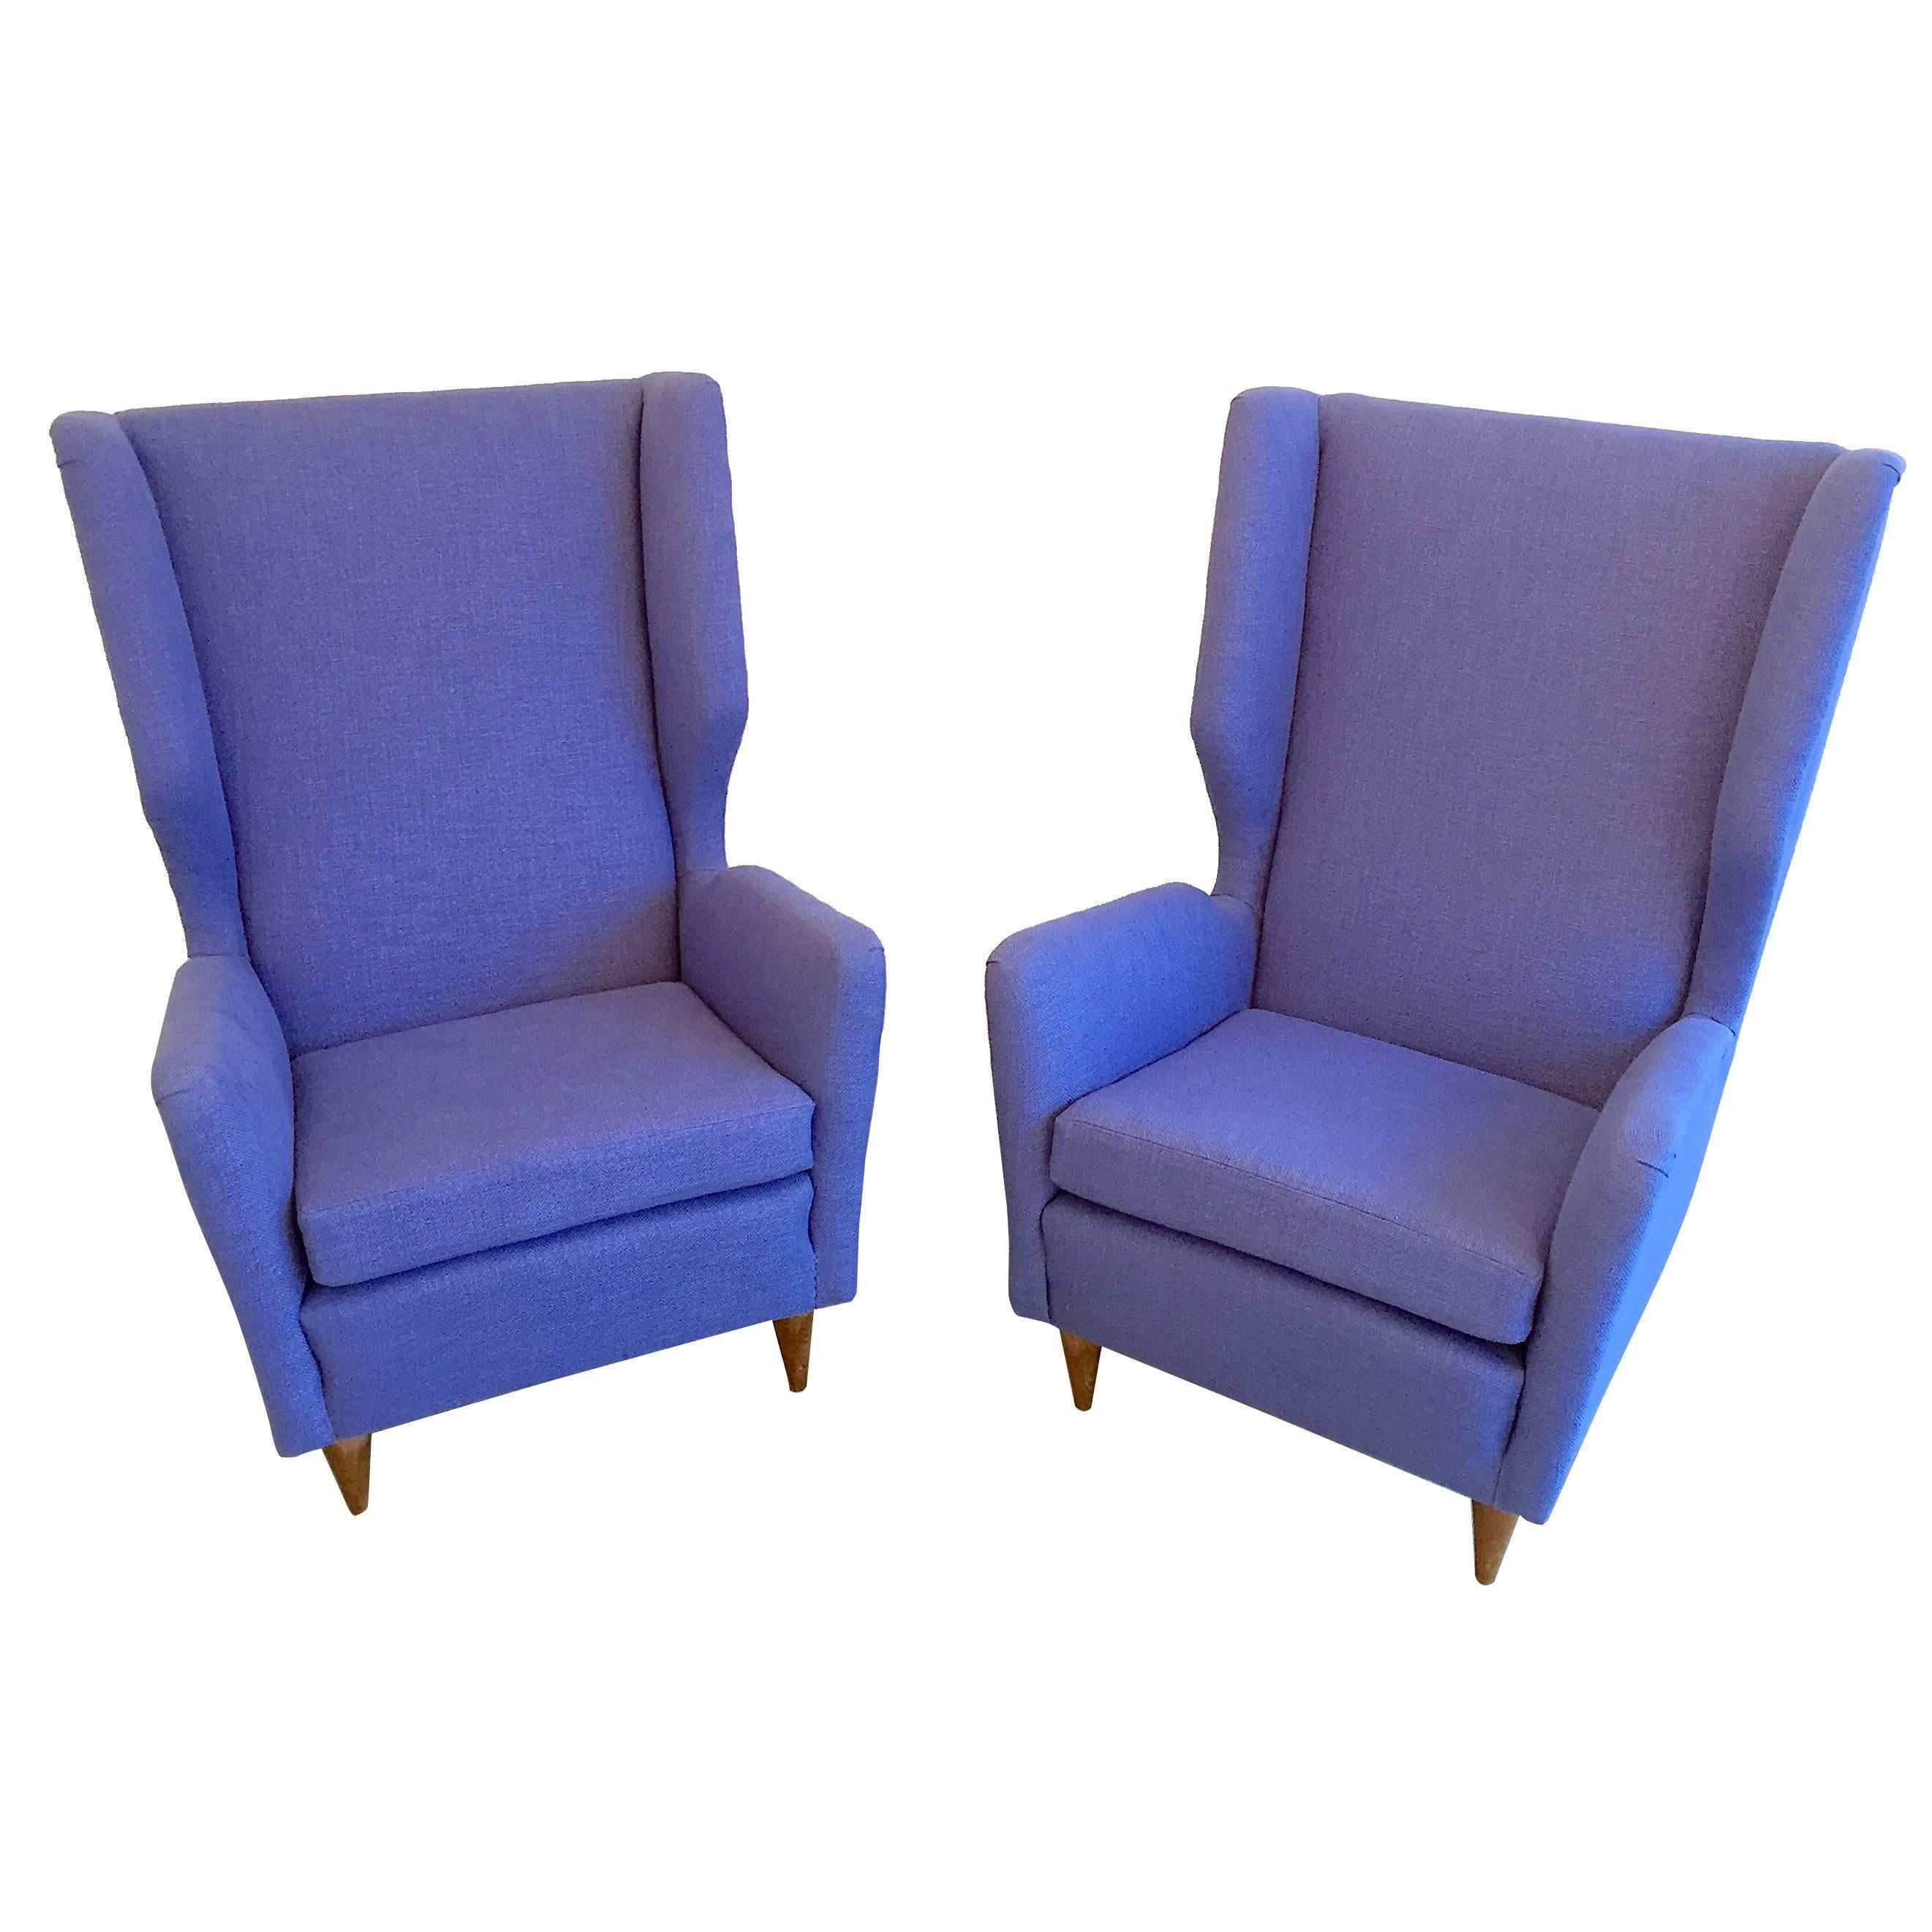 Gio Ponti Pair of Armchairs For Sale